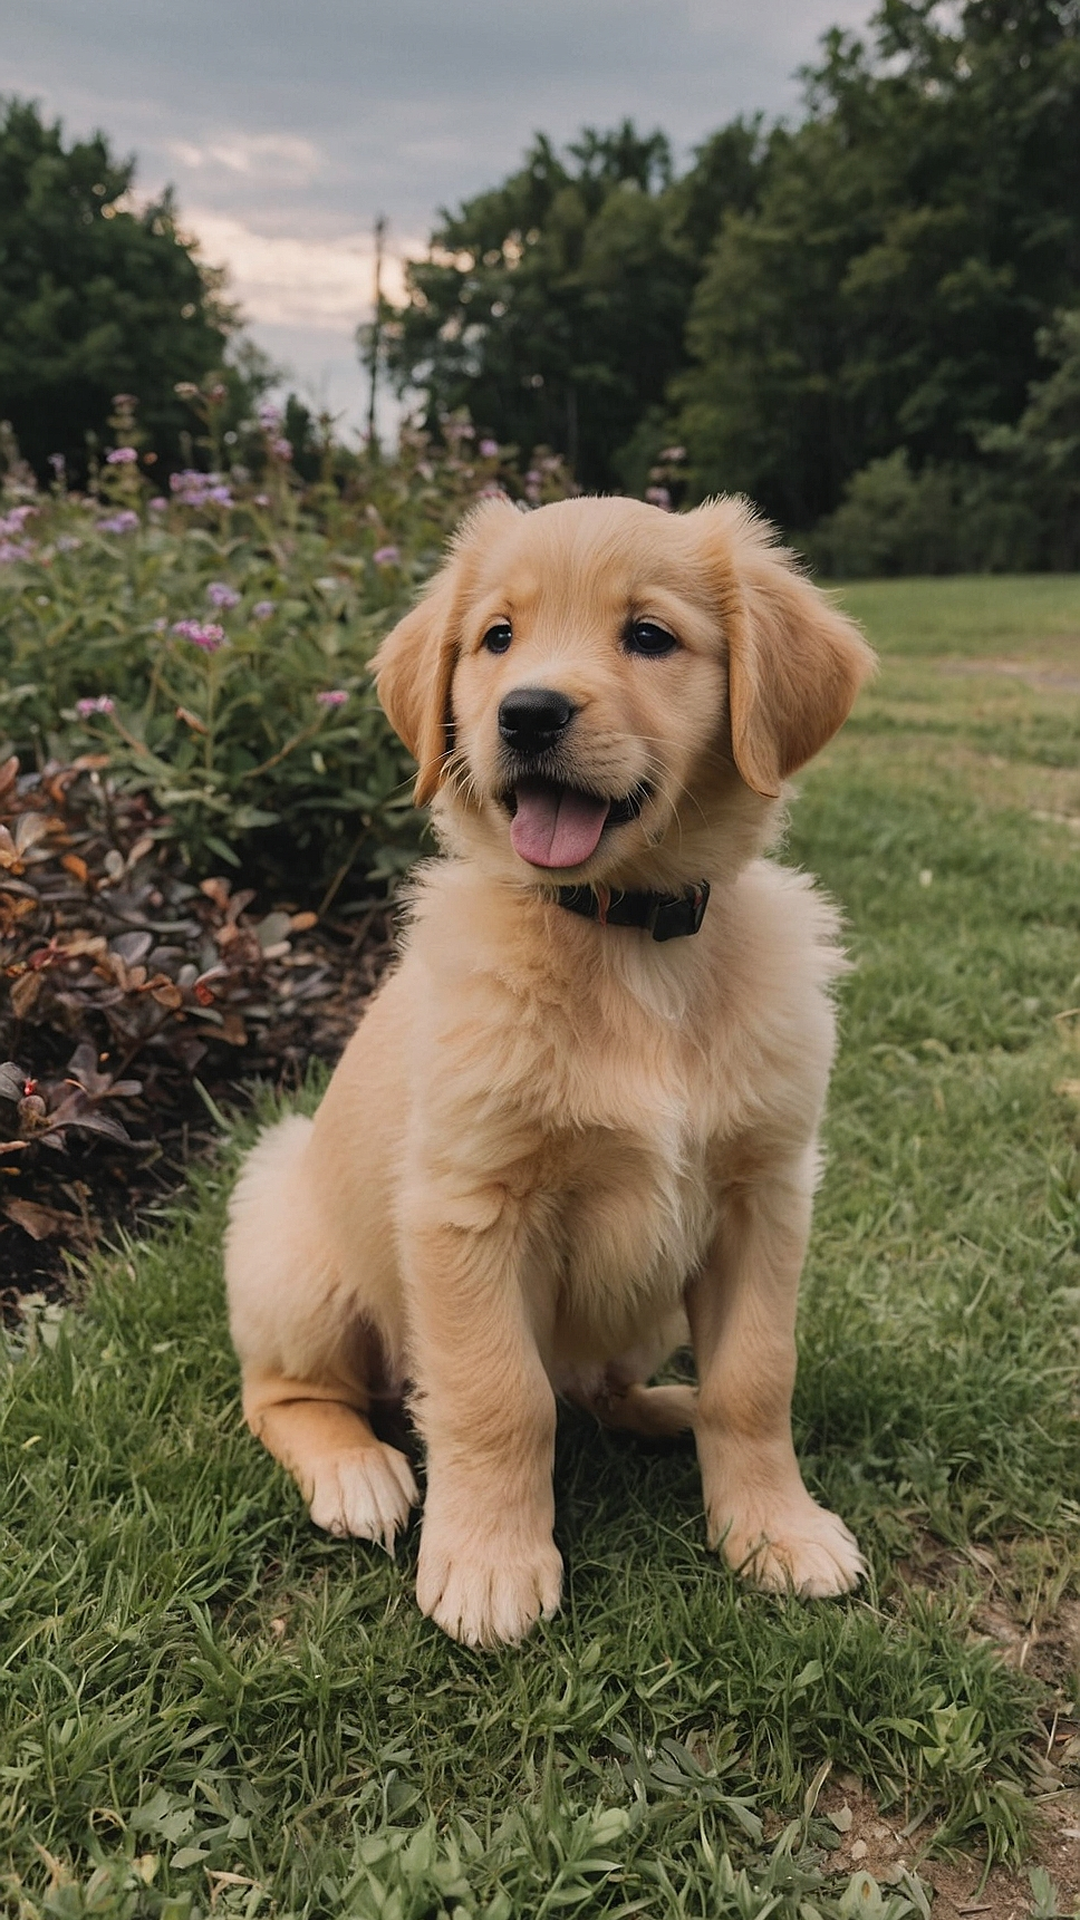 Puppy Love: A Collection of Adorable Pups